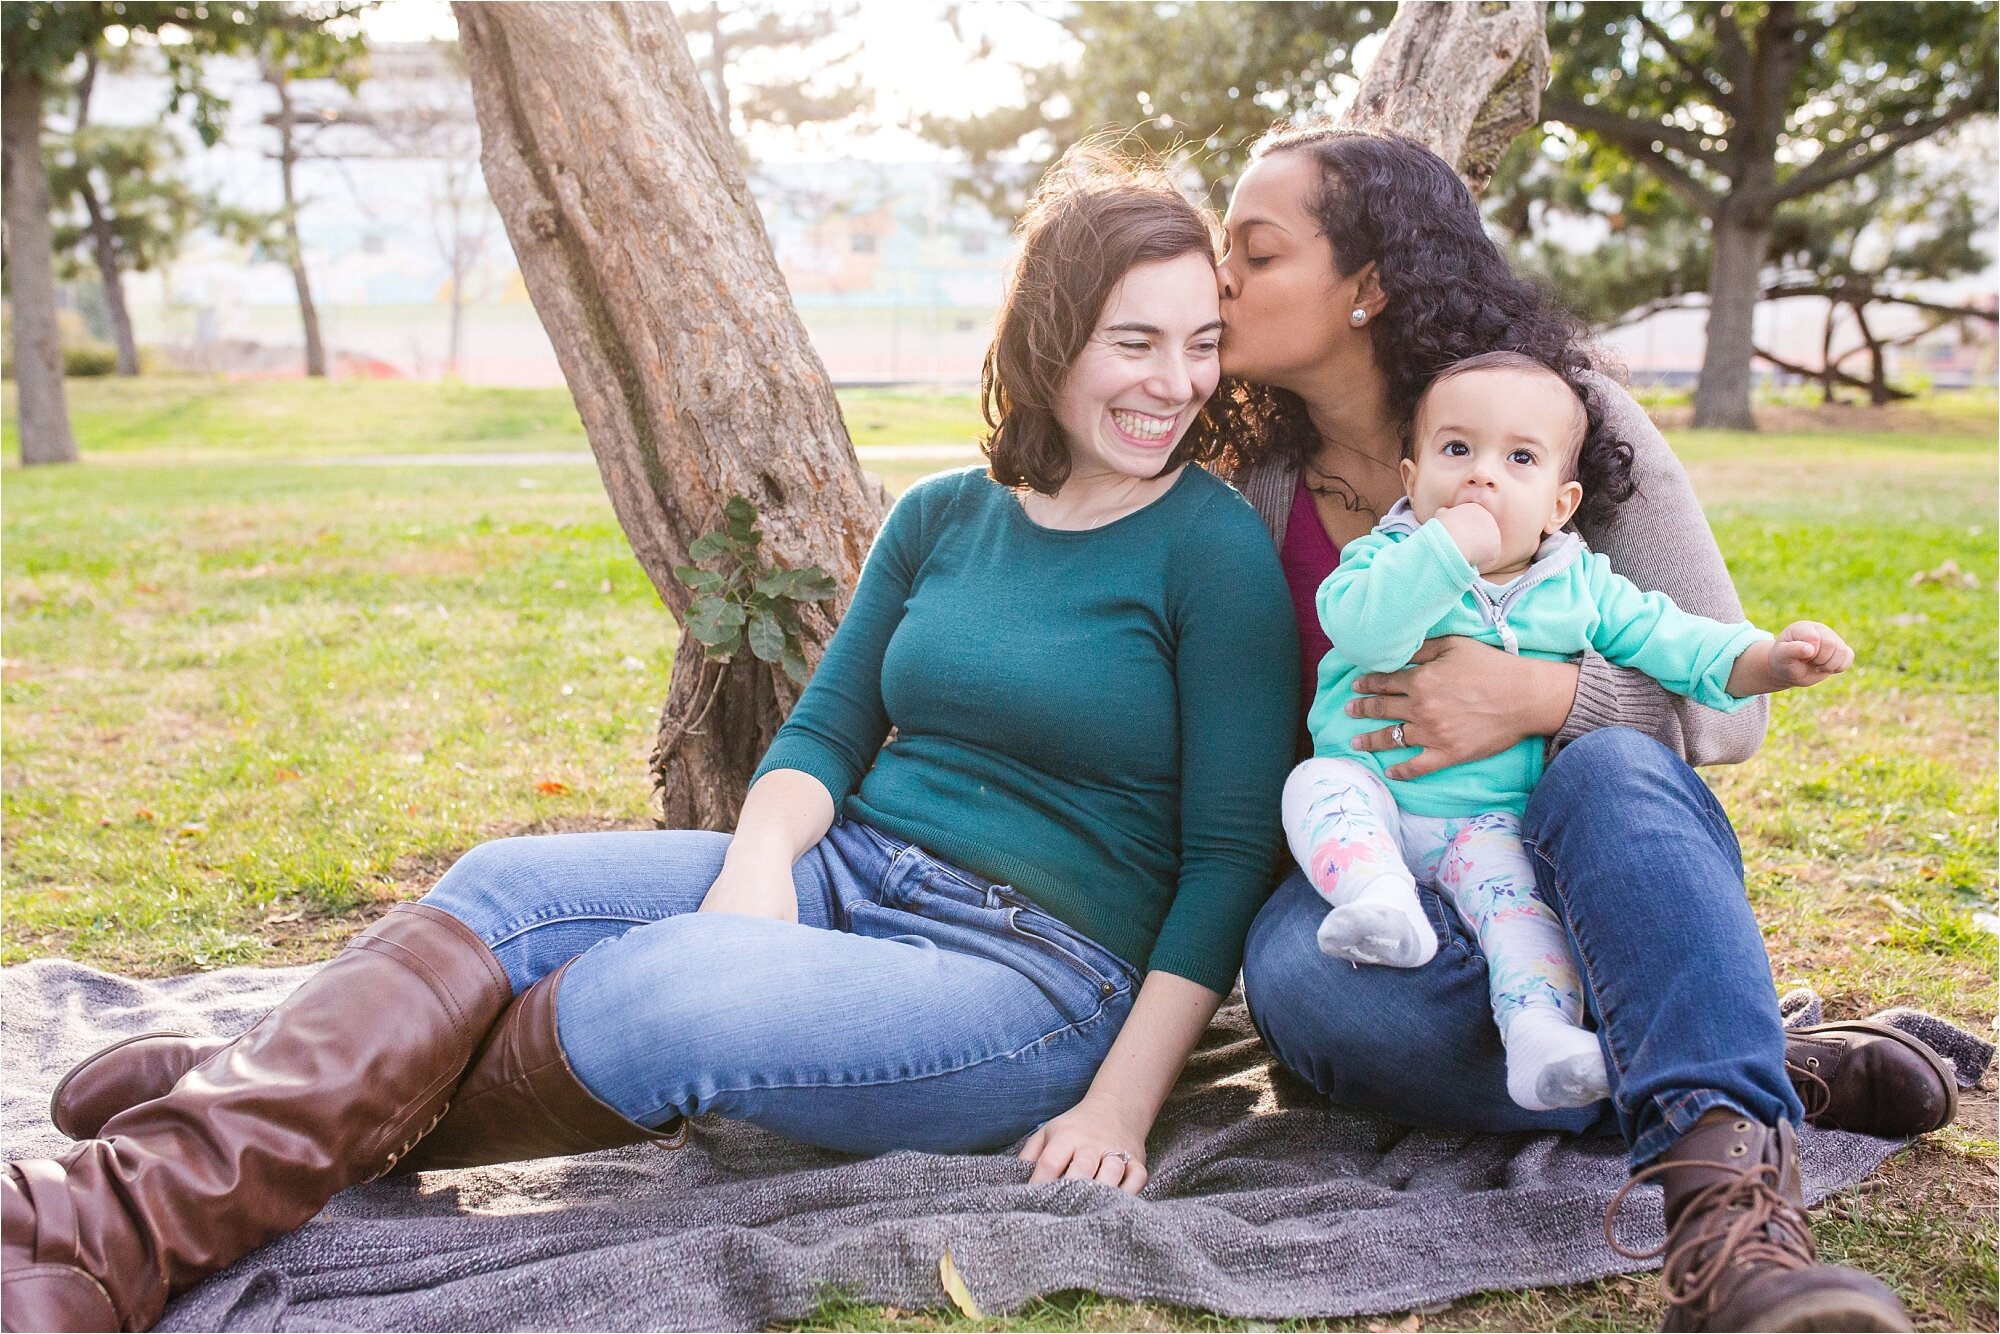 Indian lesbian gay mommies kiss and smile at their baby daughter, Family Photograph Philadelphia